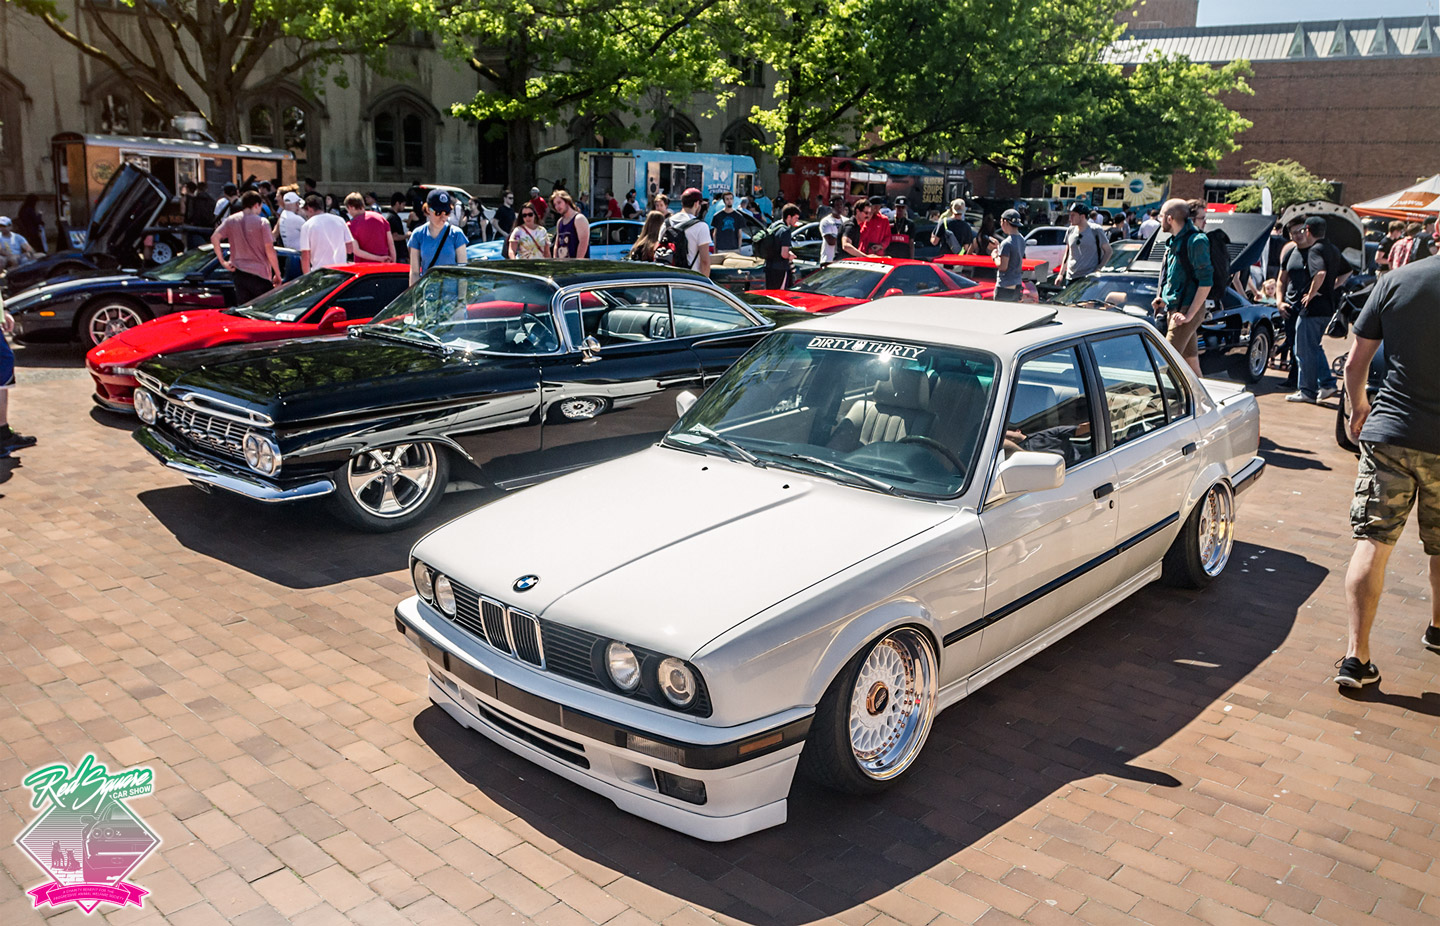 Red-Square-Car-Show-9-UW-Charity-Benefit-PAWS-org-slammed-white-bmw-e30-s